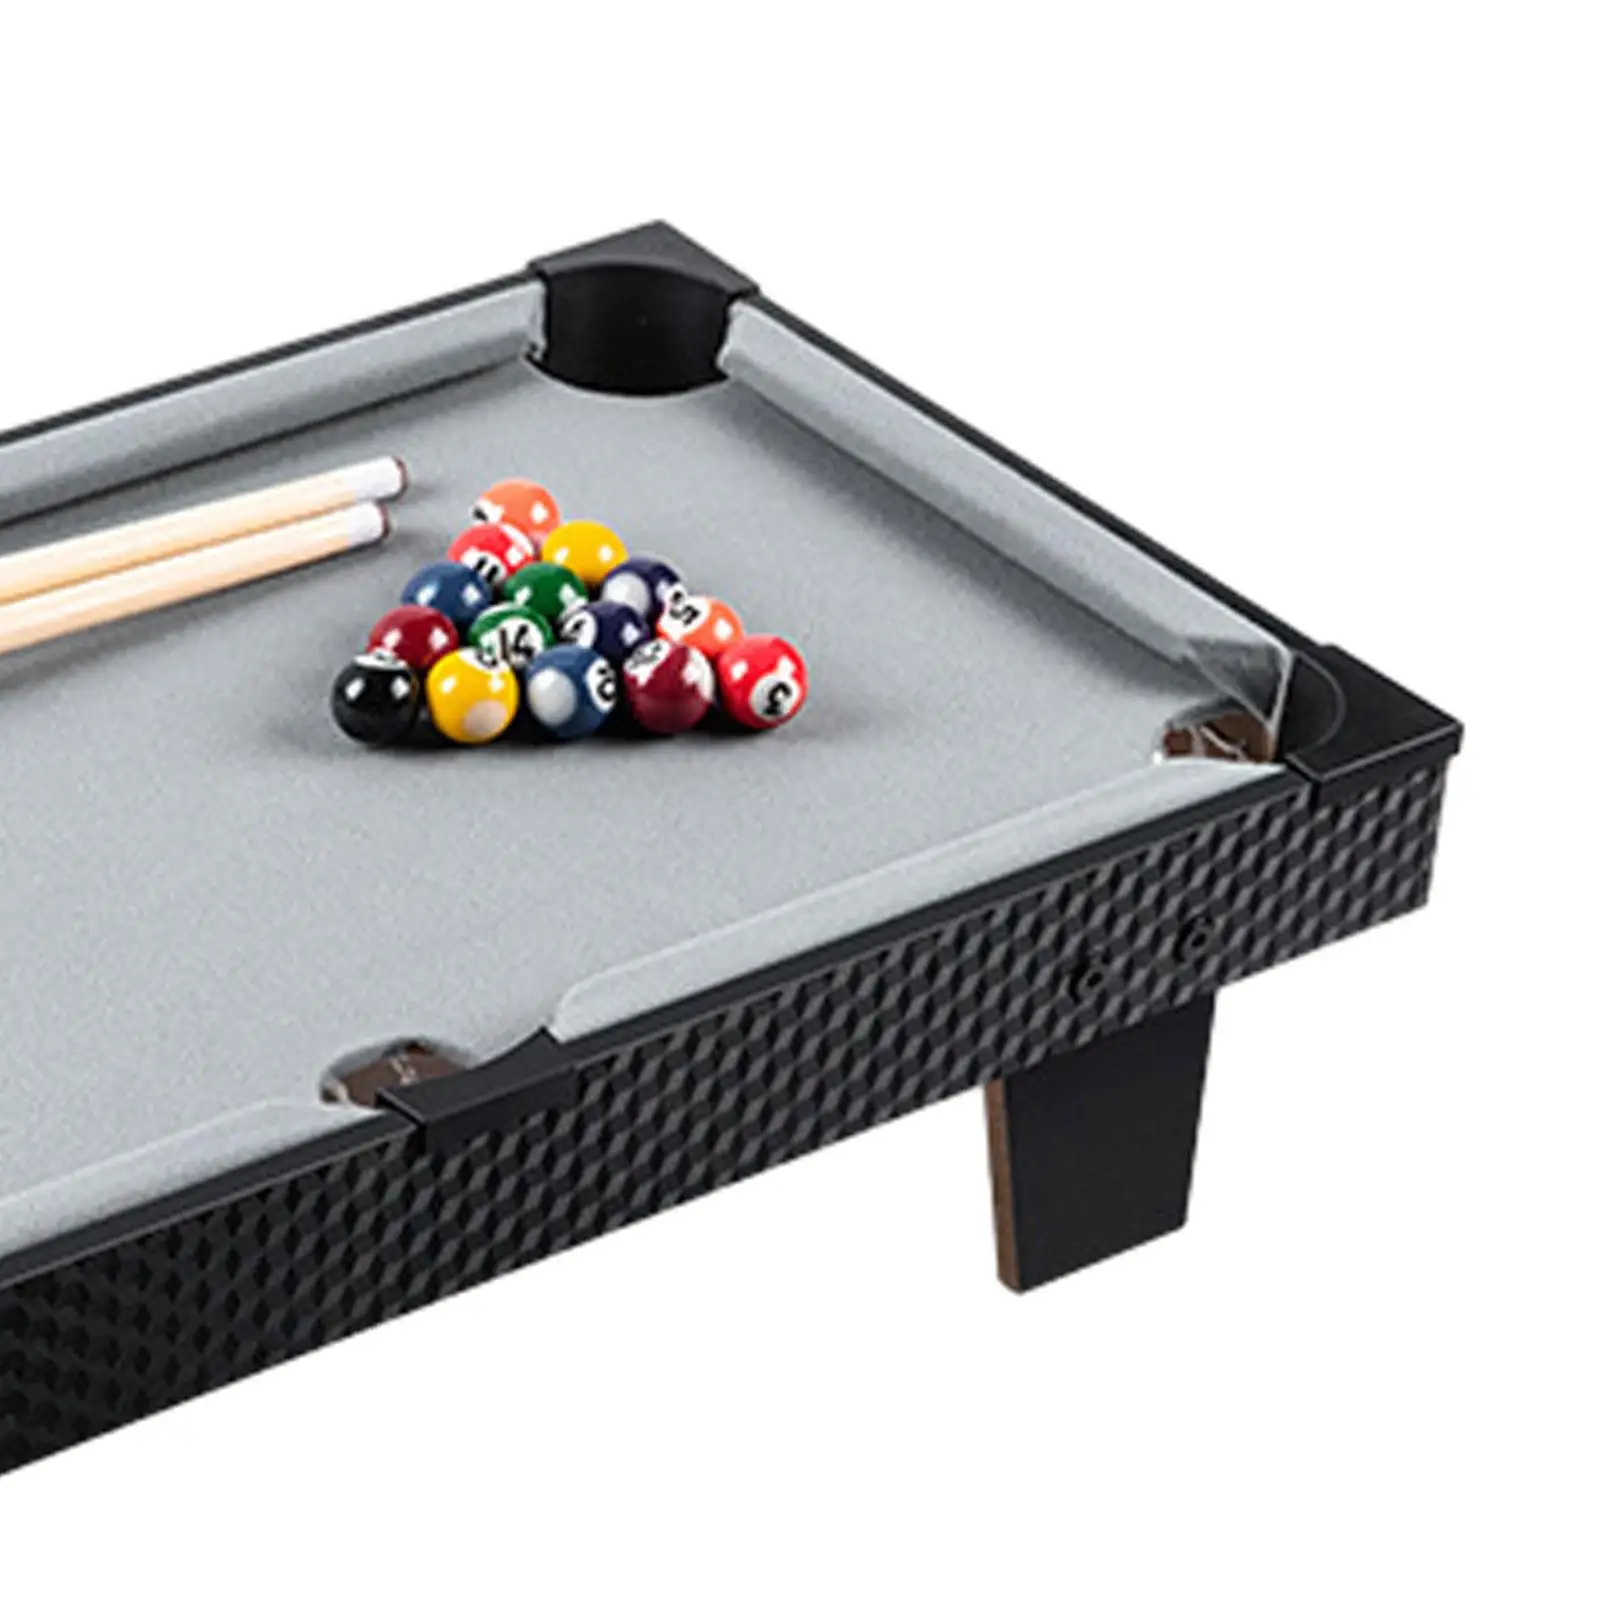 Premium Wooden Pool Table Set - Sturdy Tabletop Billiards for Family Fun